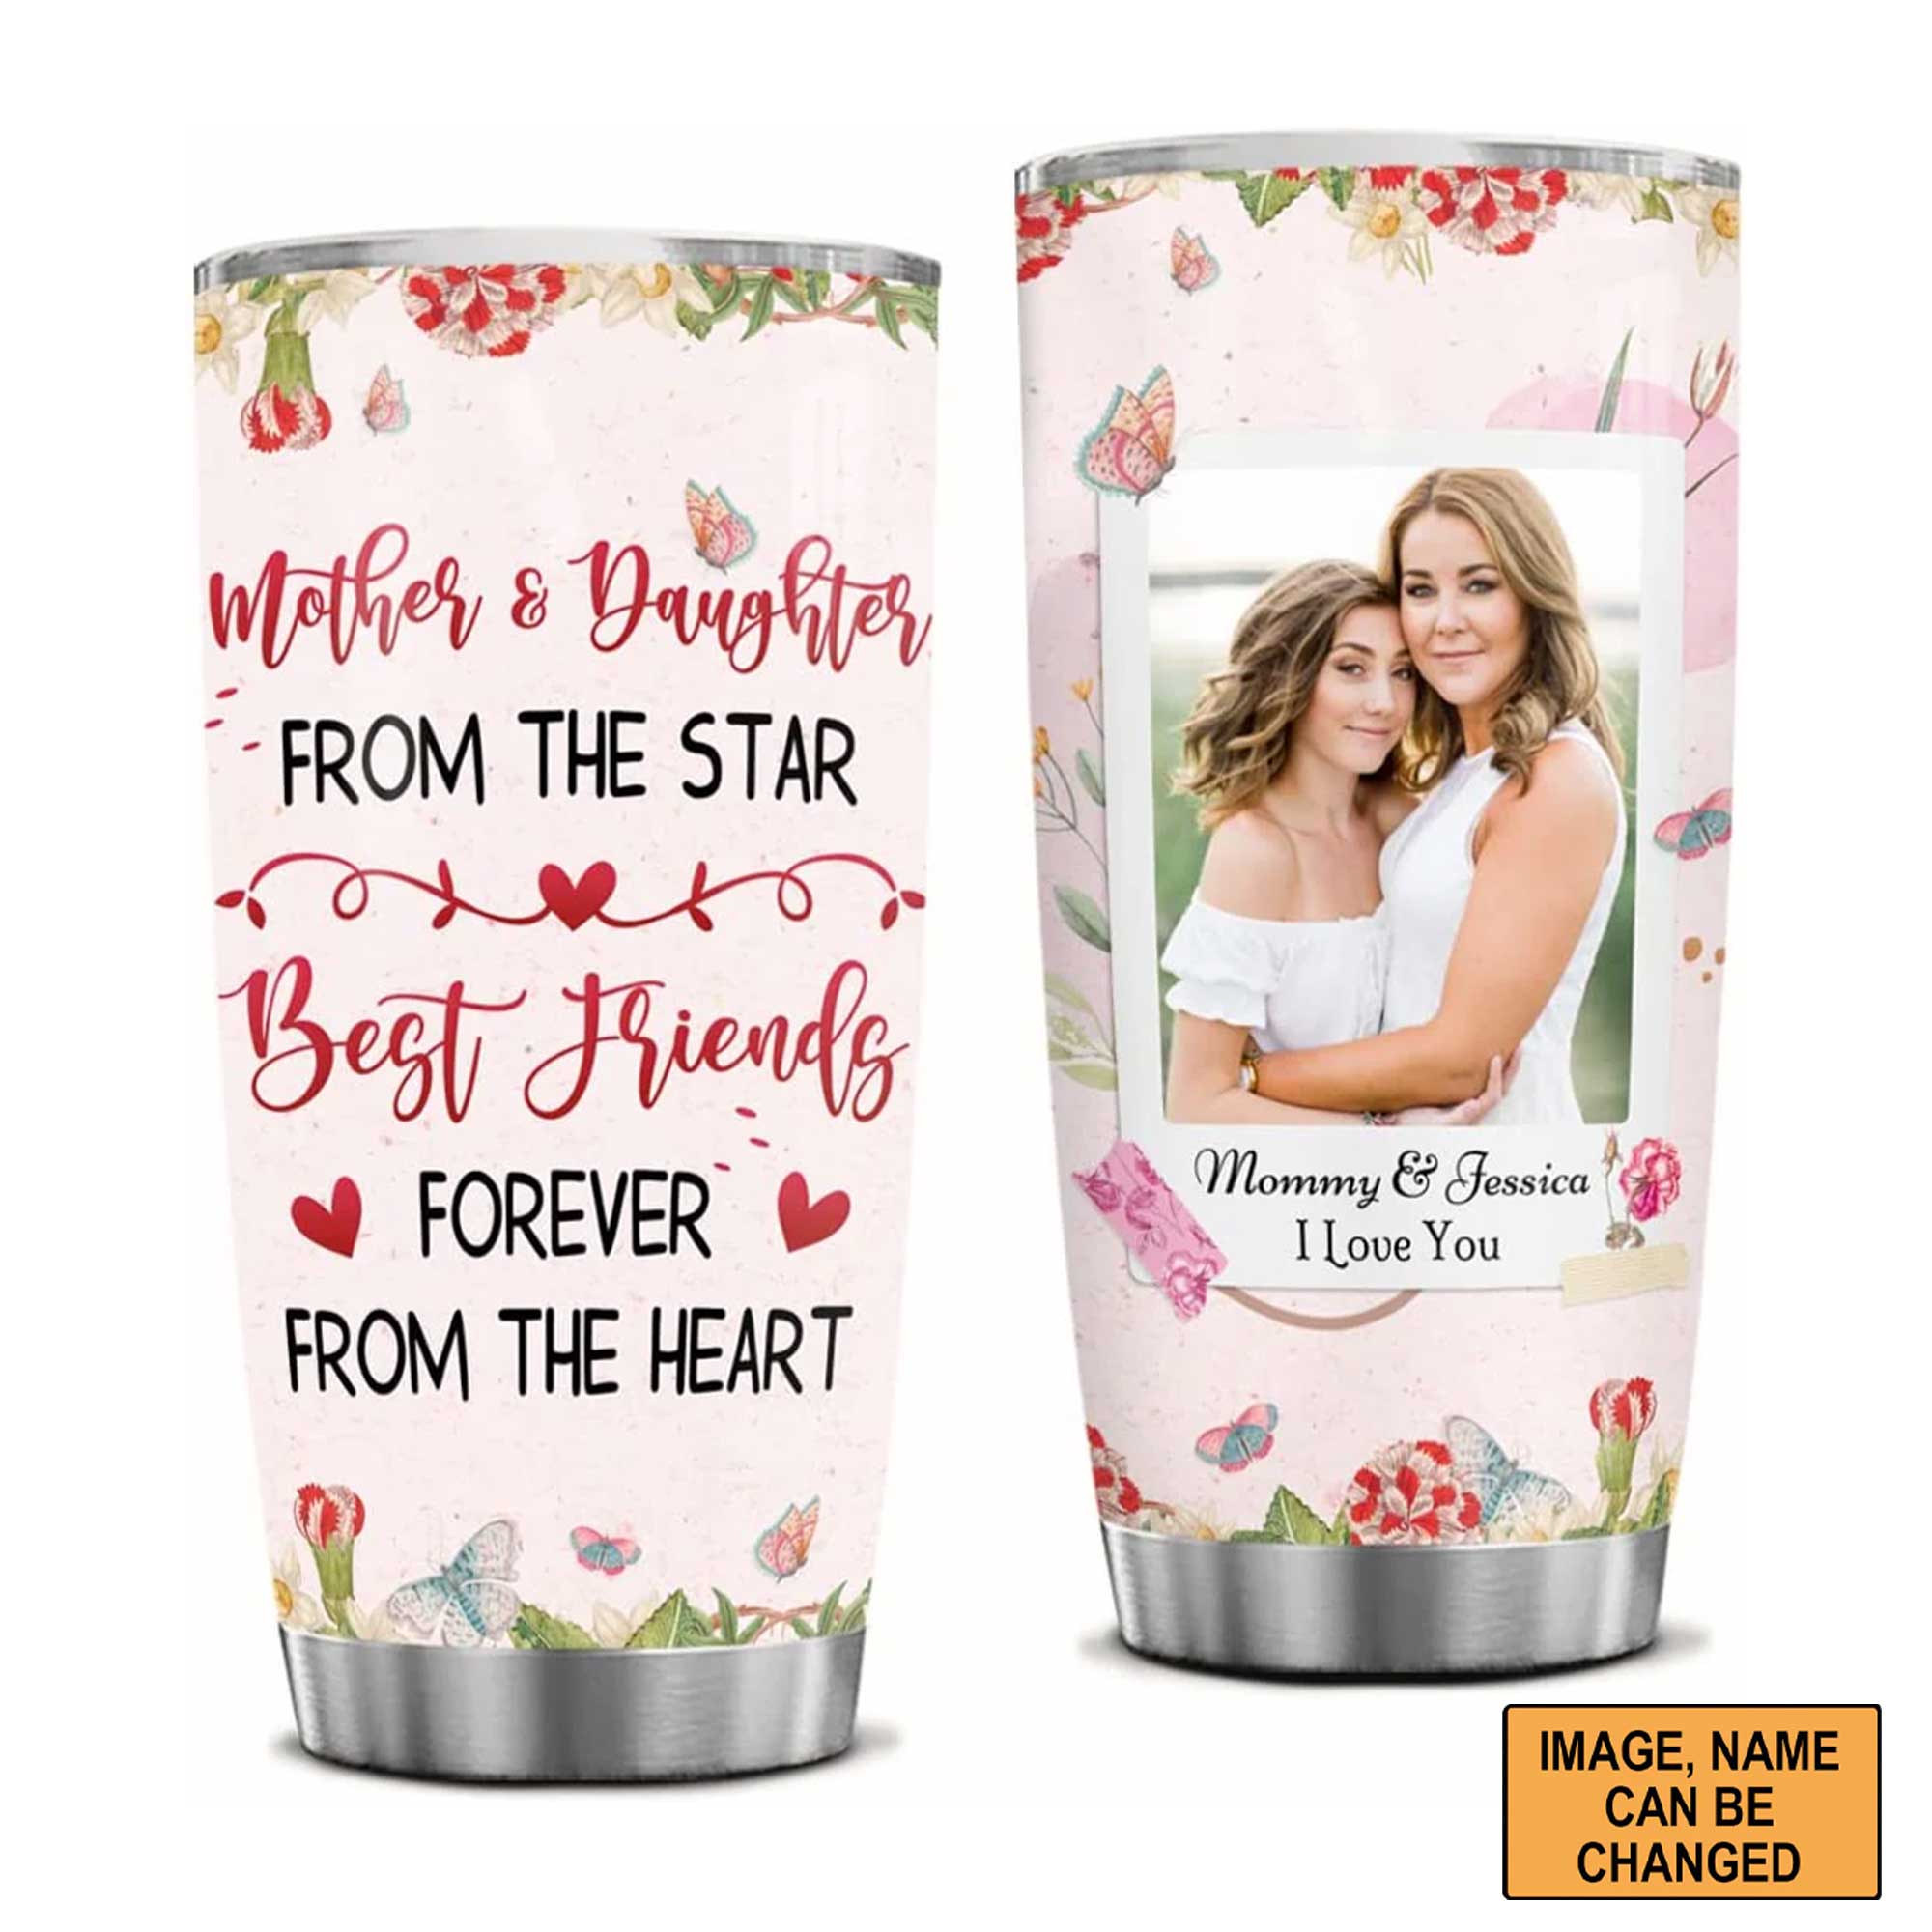 Personalized Mother's Day Gift Tumbler - Custom Gift For Mother's Day, Presents For Mom - Photo Mother & Daughter Best Friends Forever Tumbler